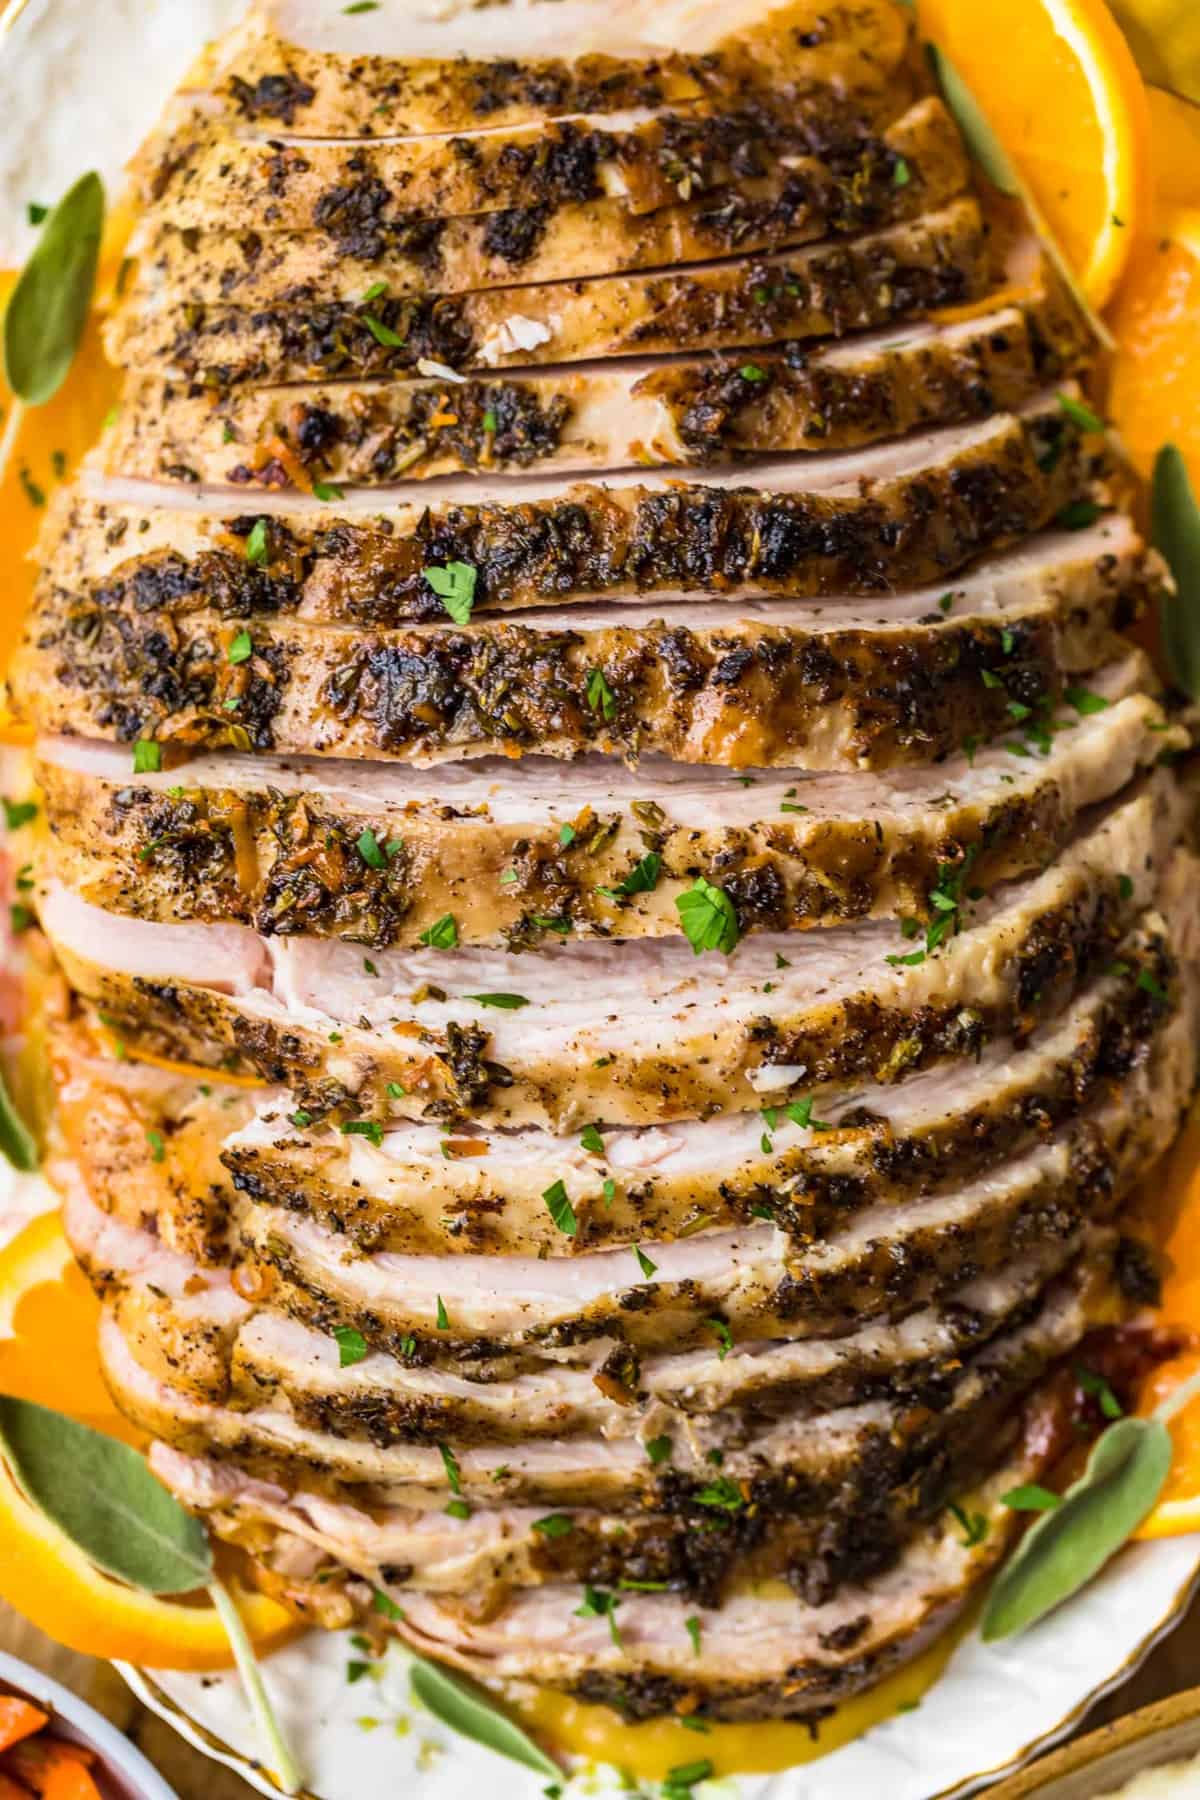 Turkey sliced to show the juicy meat